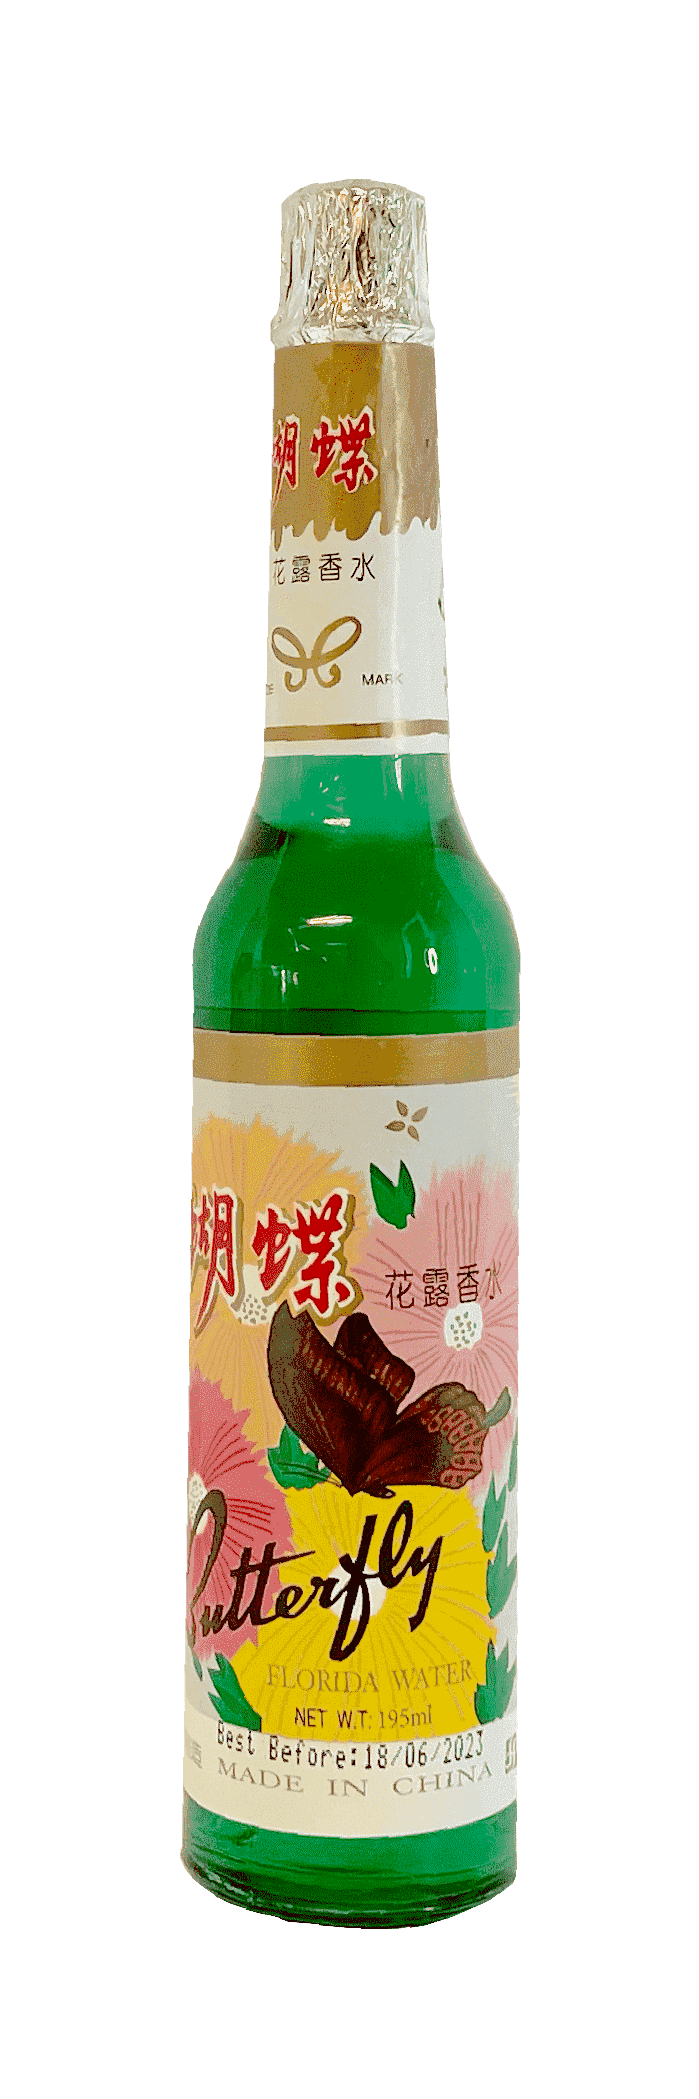 Butterfly Florida Water no.1, 195ml China